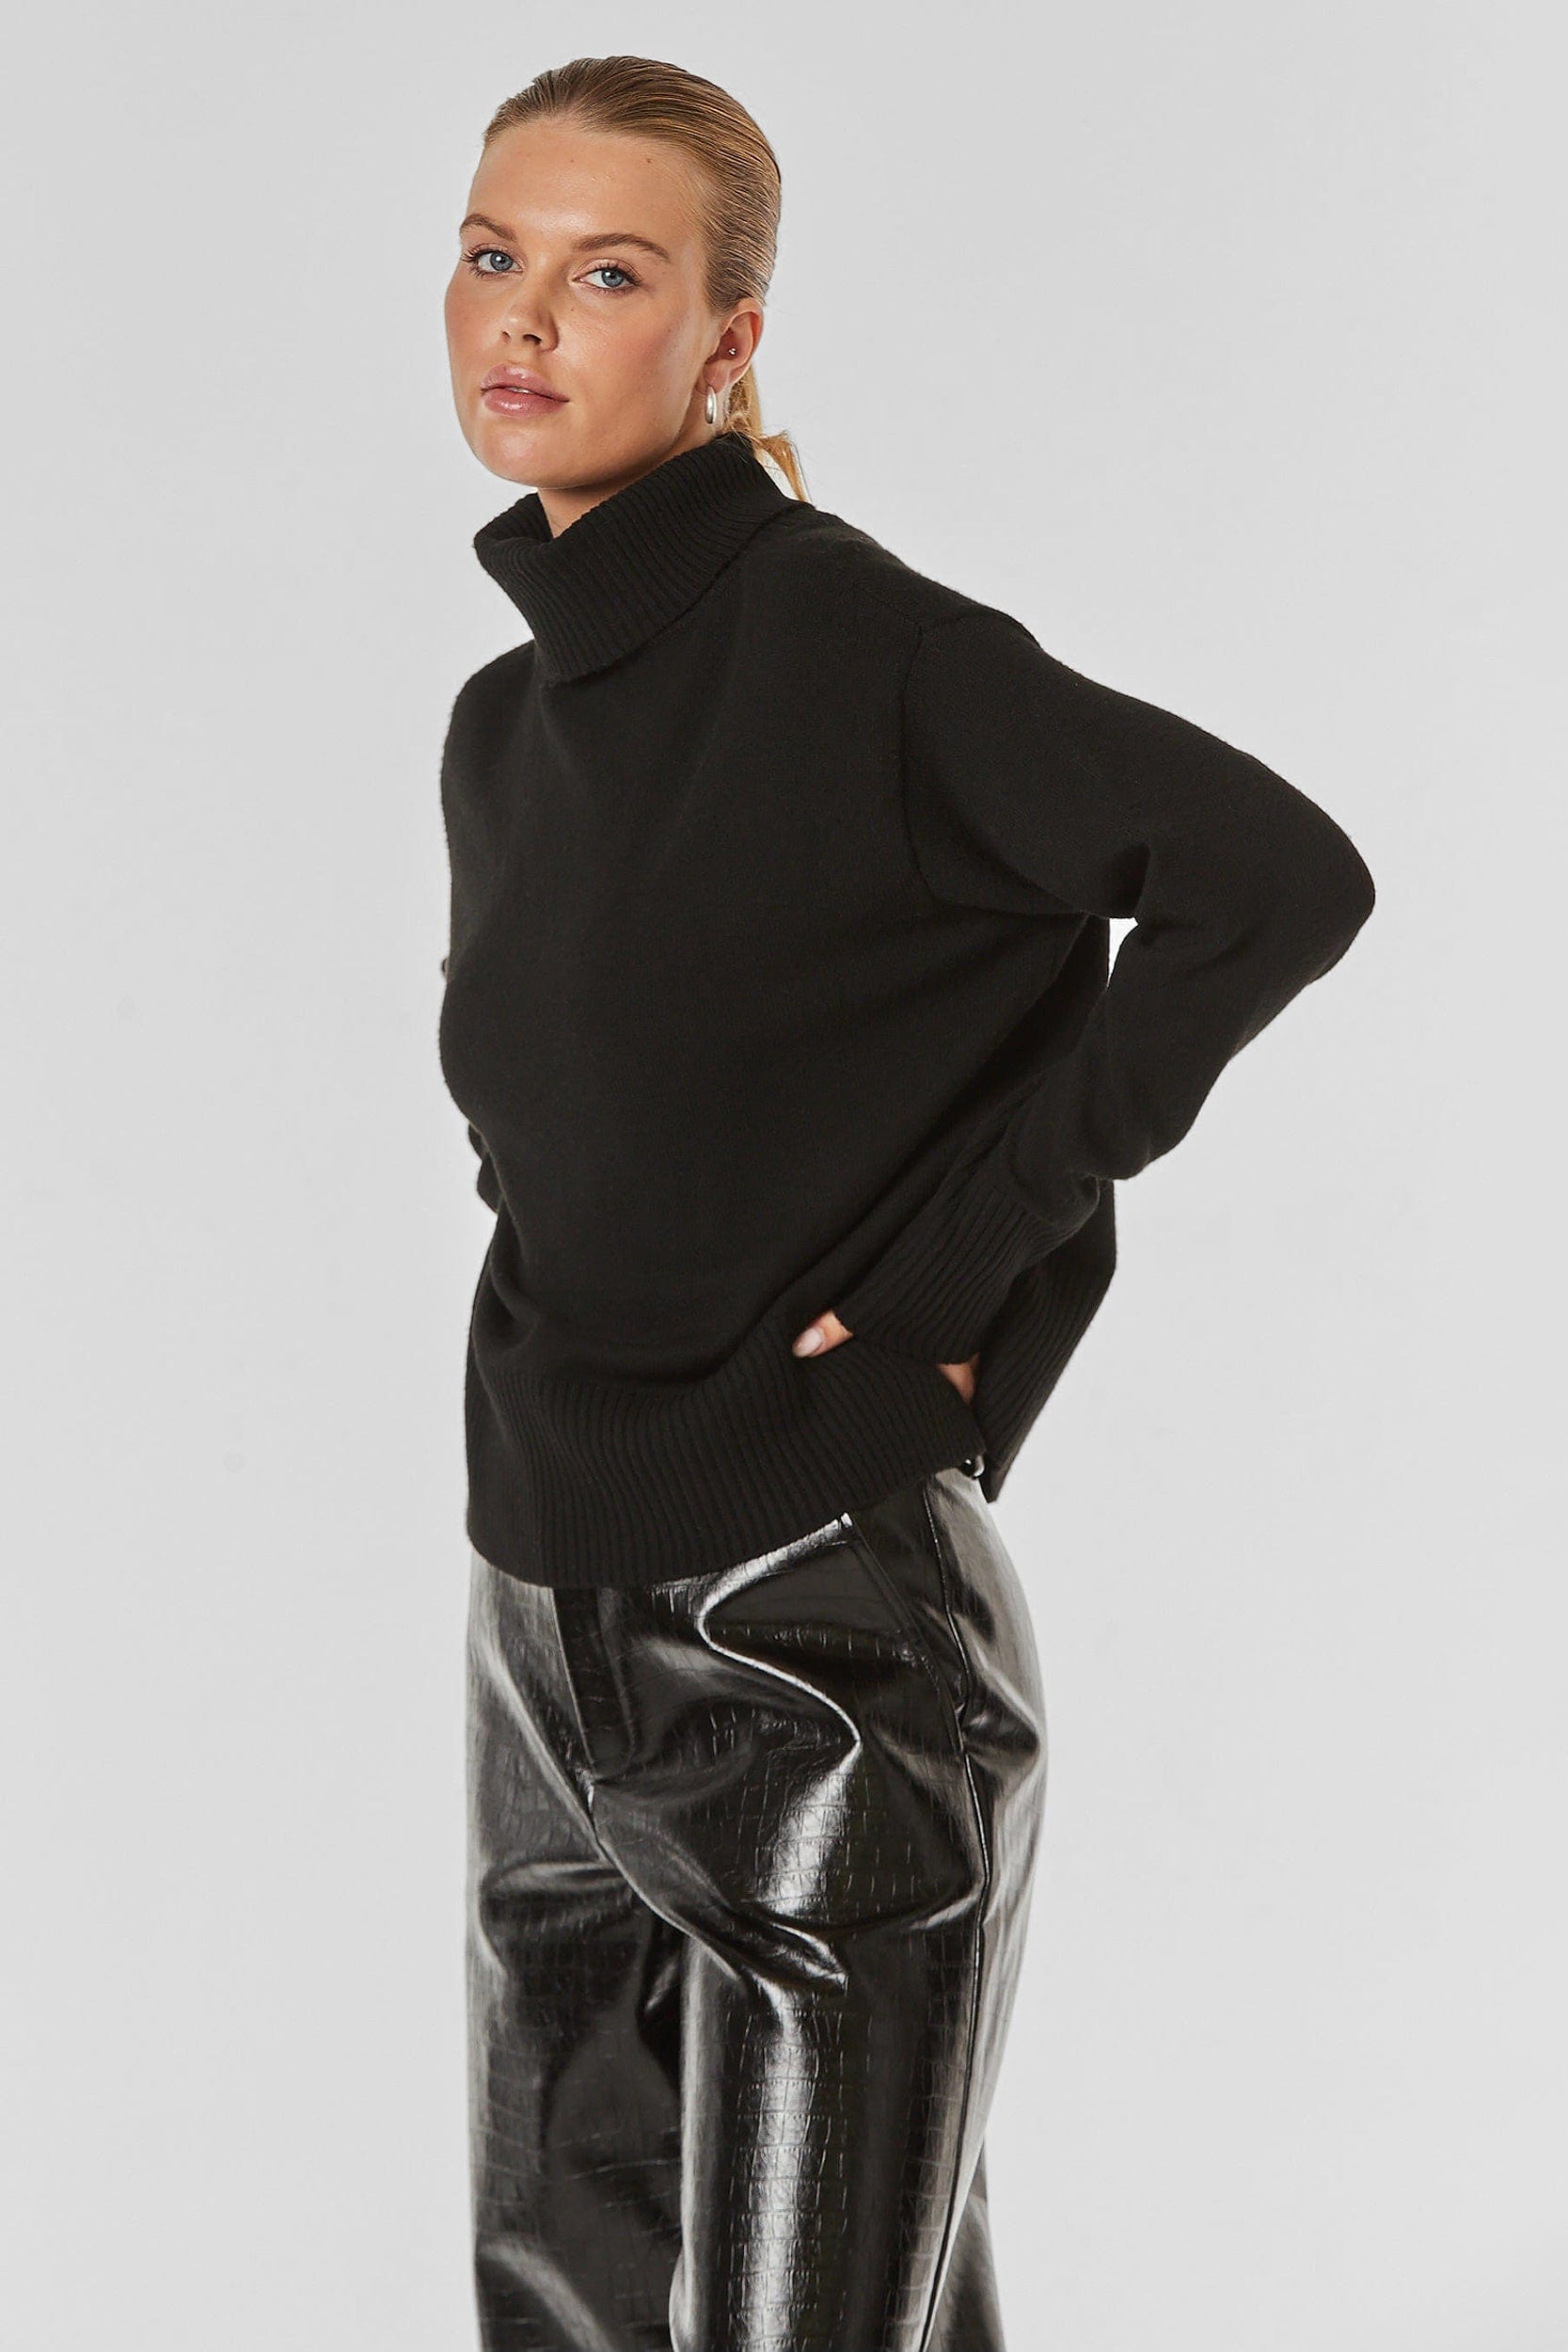 A person with blond hair is wearing a black Gia Oversized Sweater and black vinyl pants. They have their hands in their pockets and are looking directly at the camera against a plain grey background.